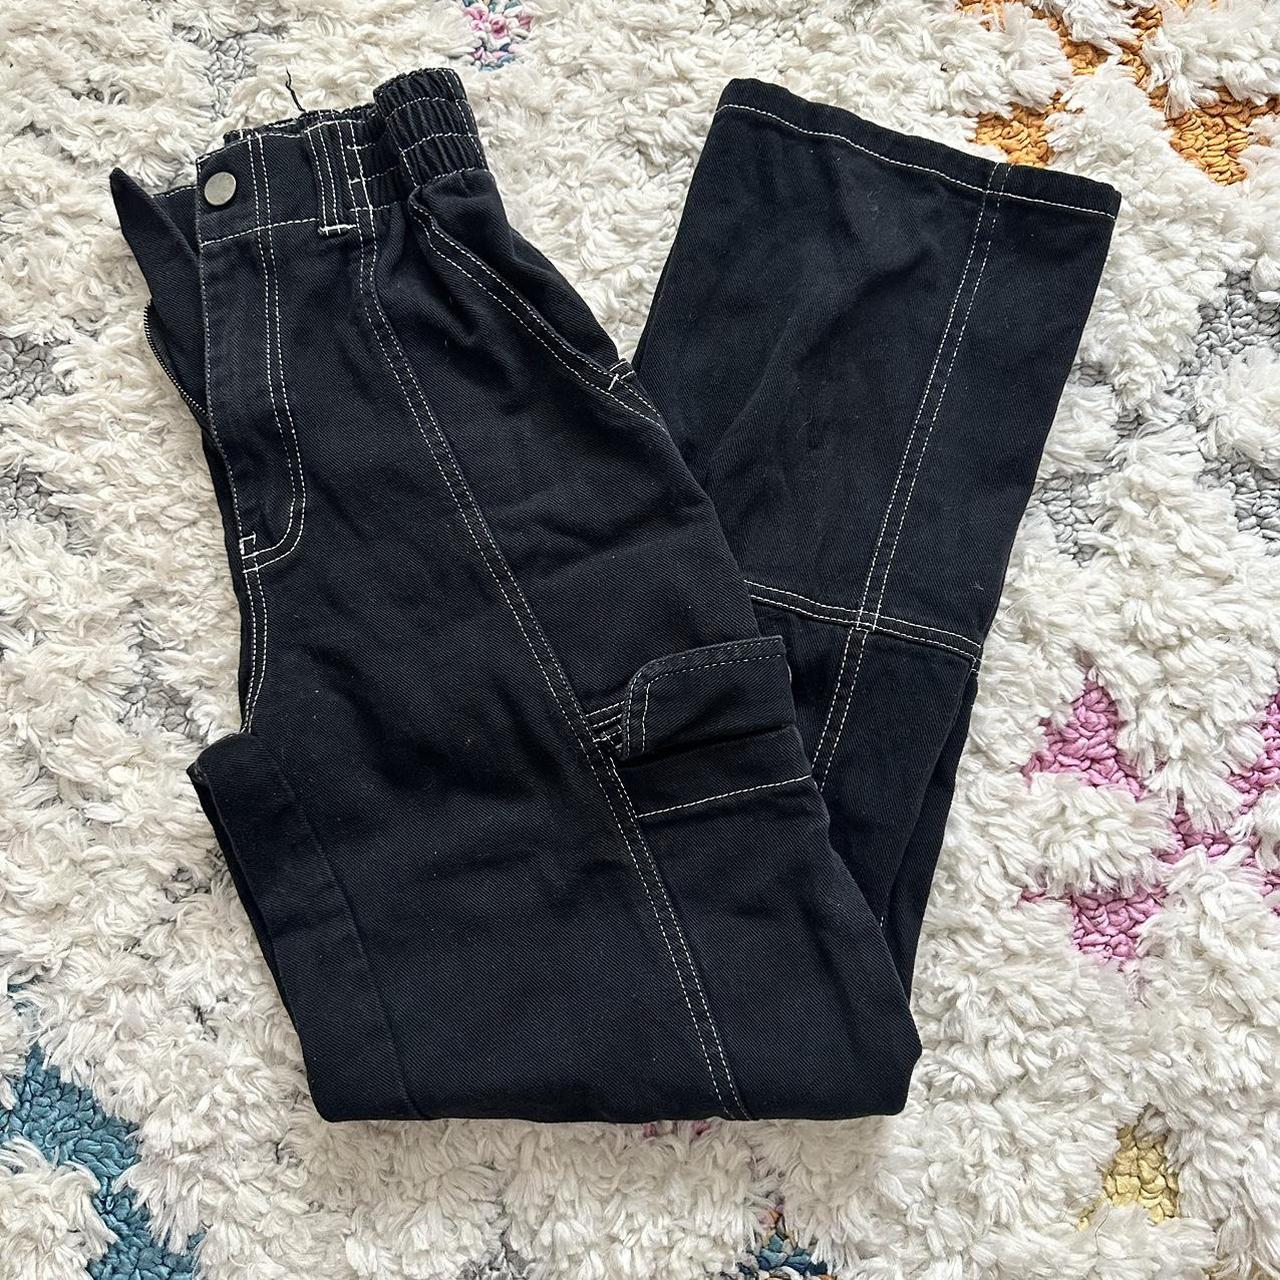 tillys rsq cargo pants 🖤 used to absolutely love - Depop